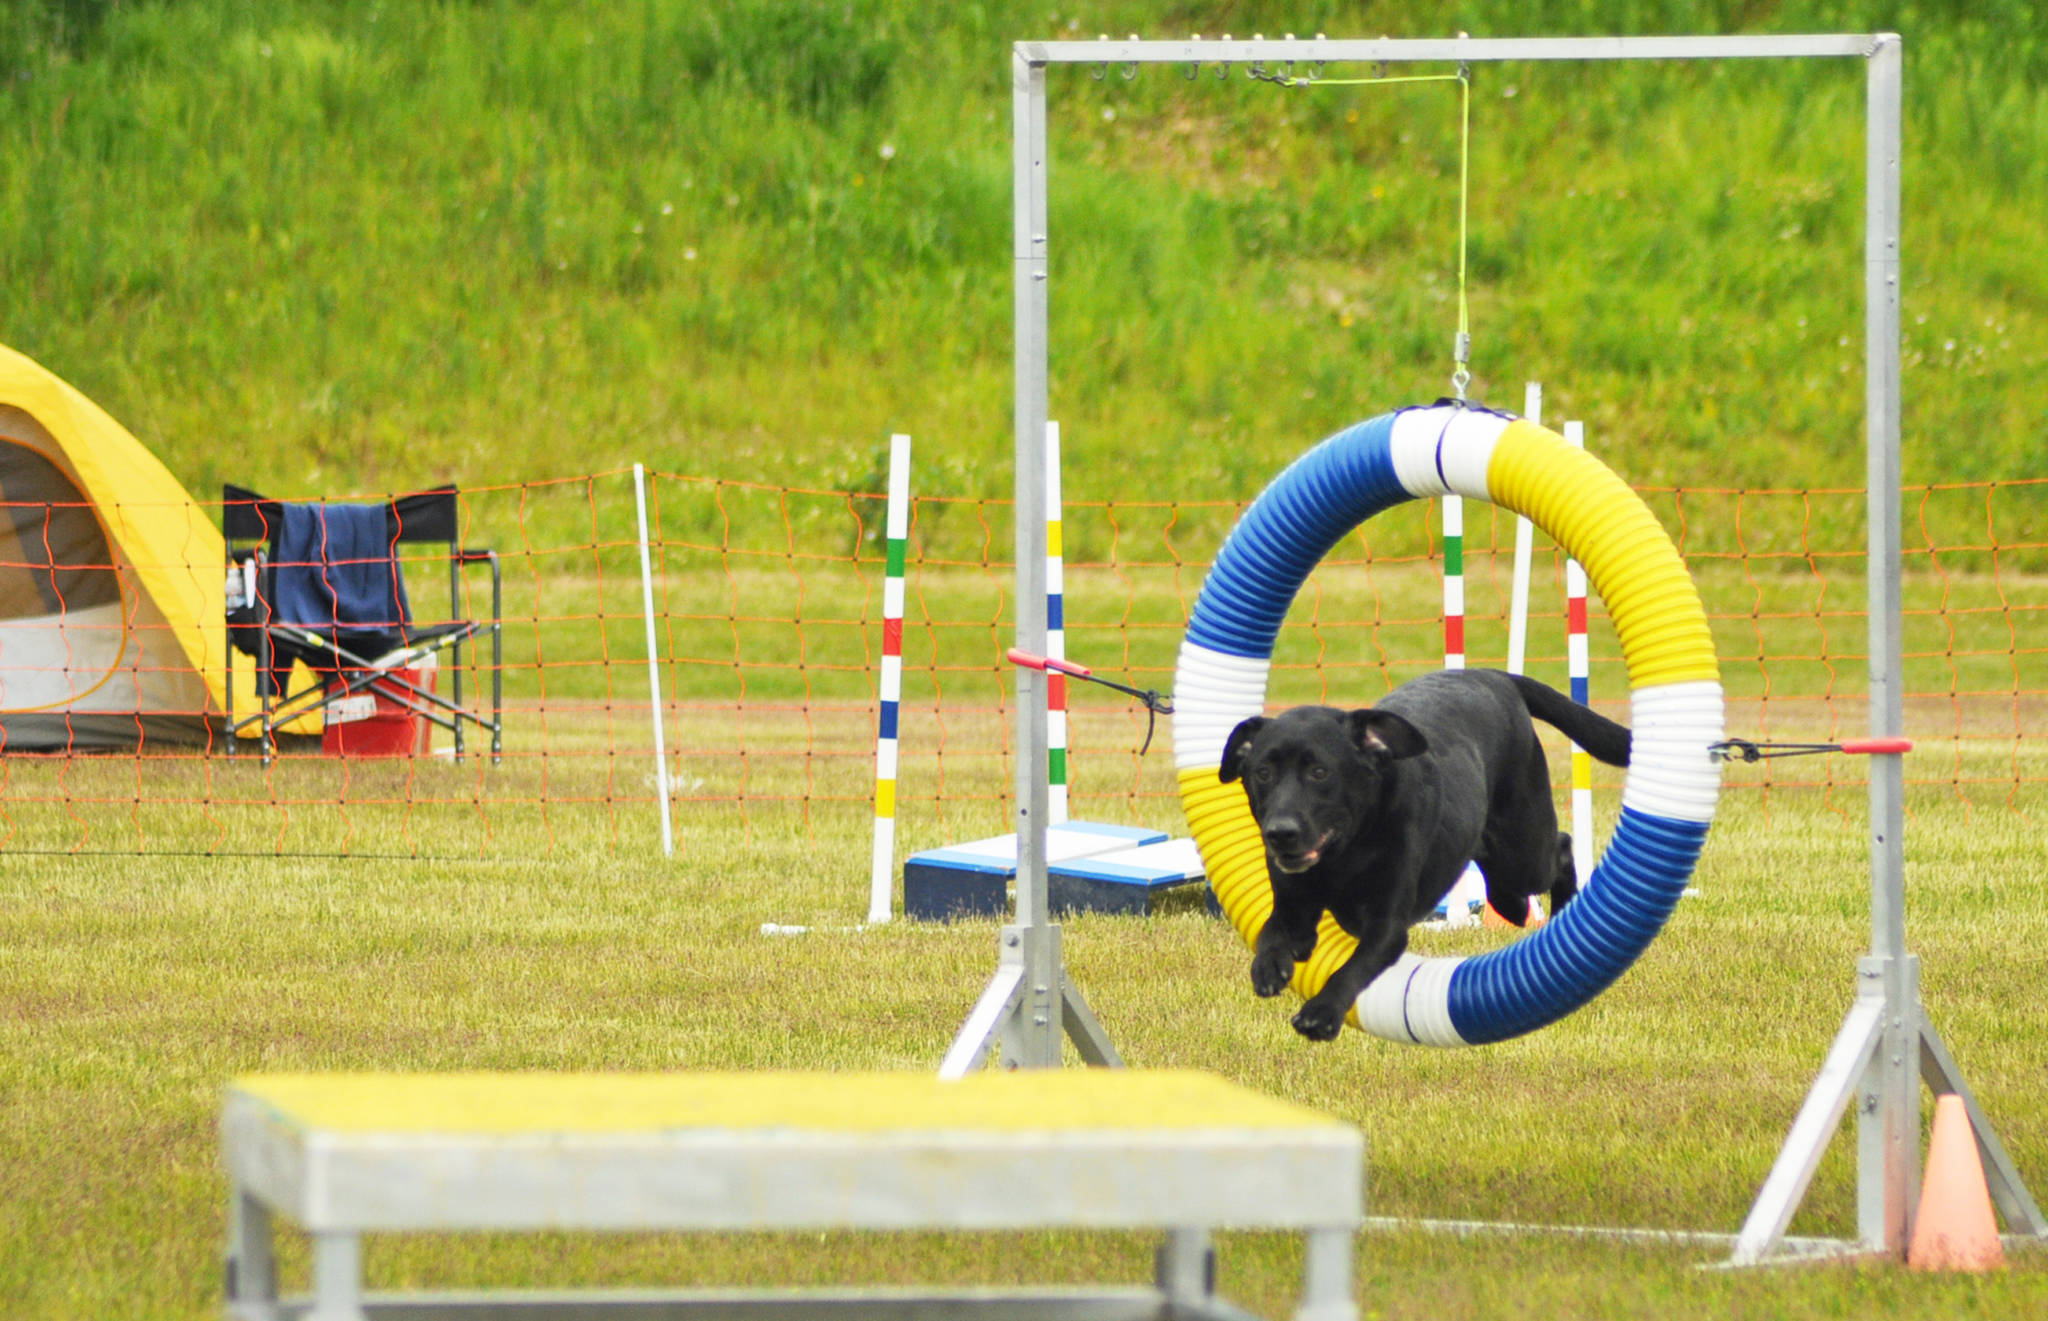 A dog jumps through a hoop during an agility trial at the Kenai Kennel Club’s annual dog show, obedience and agility trials on Saturday, July 14, 2018 in Soldotna, Alaska. Dog owners come from all over the state to take part in the events each year. (Photo by Elizabeth Earl/Peninsula Clarion)